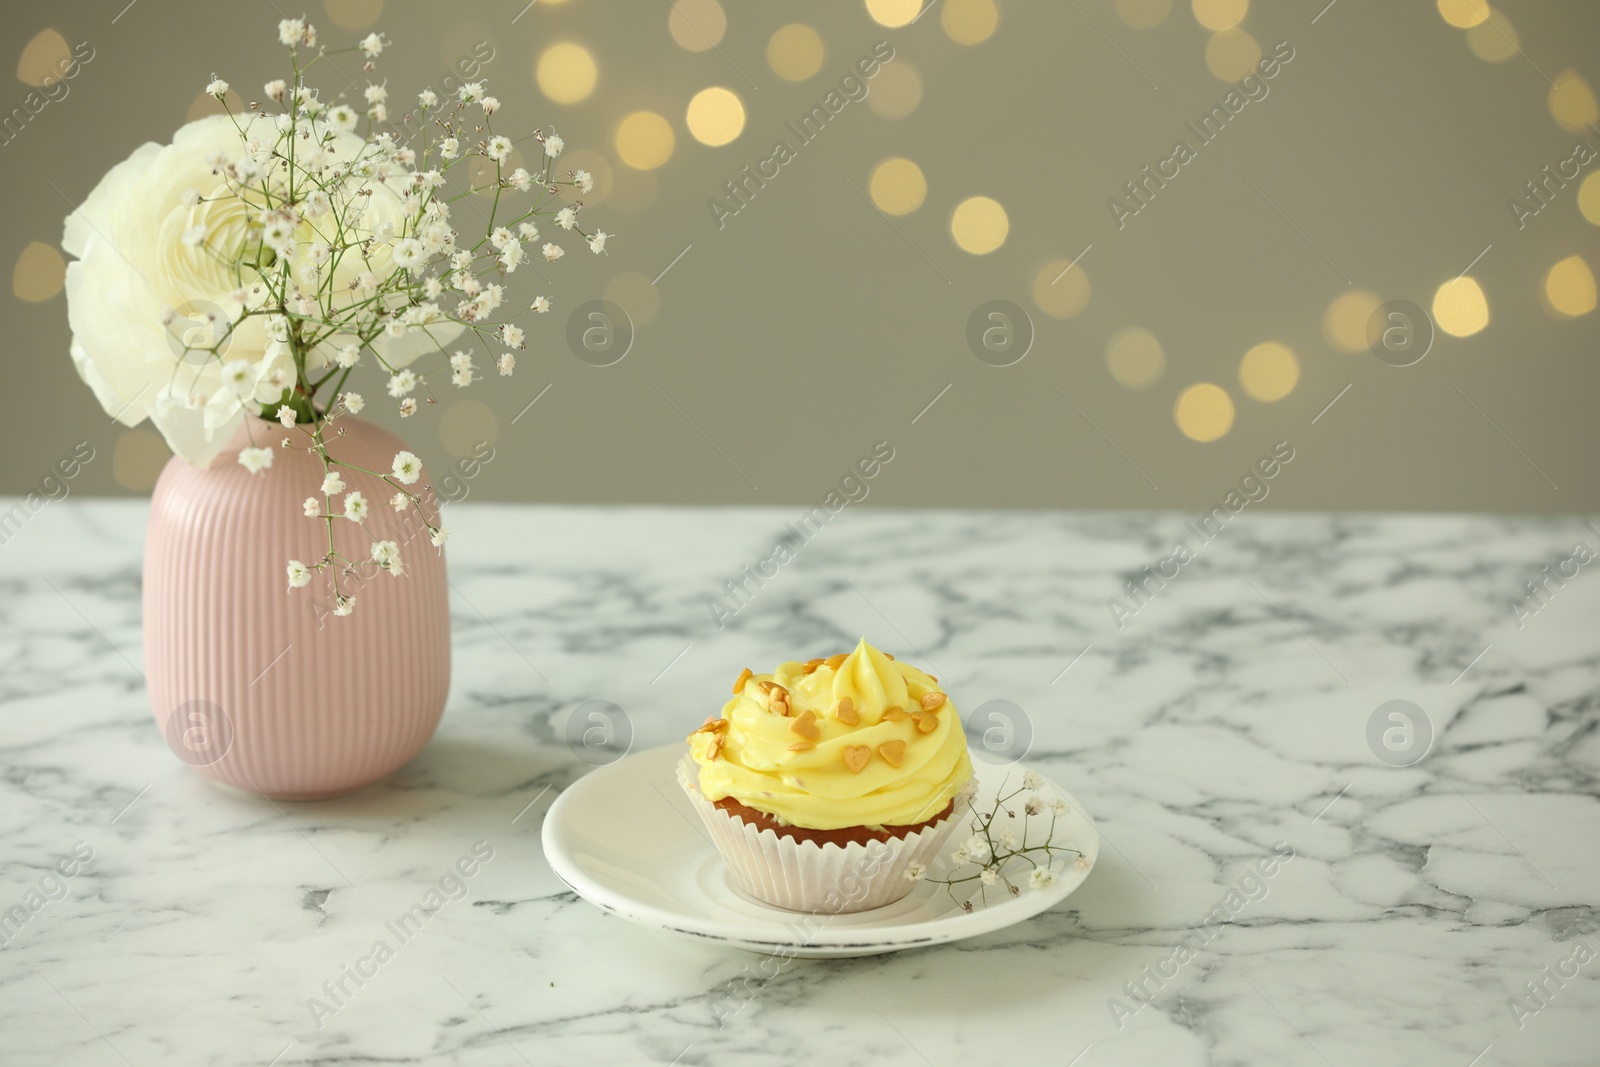 Photo of Delicious cupcake with yellow cream and flowers on white marble table against blurred lights